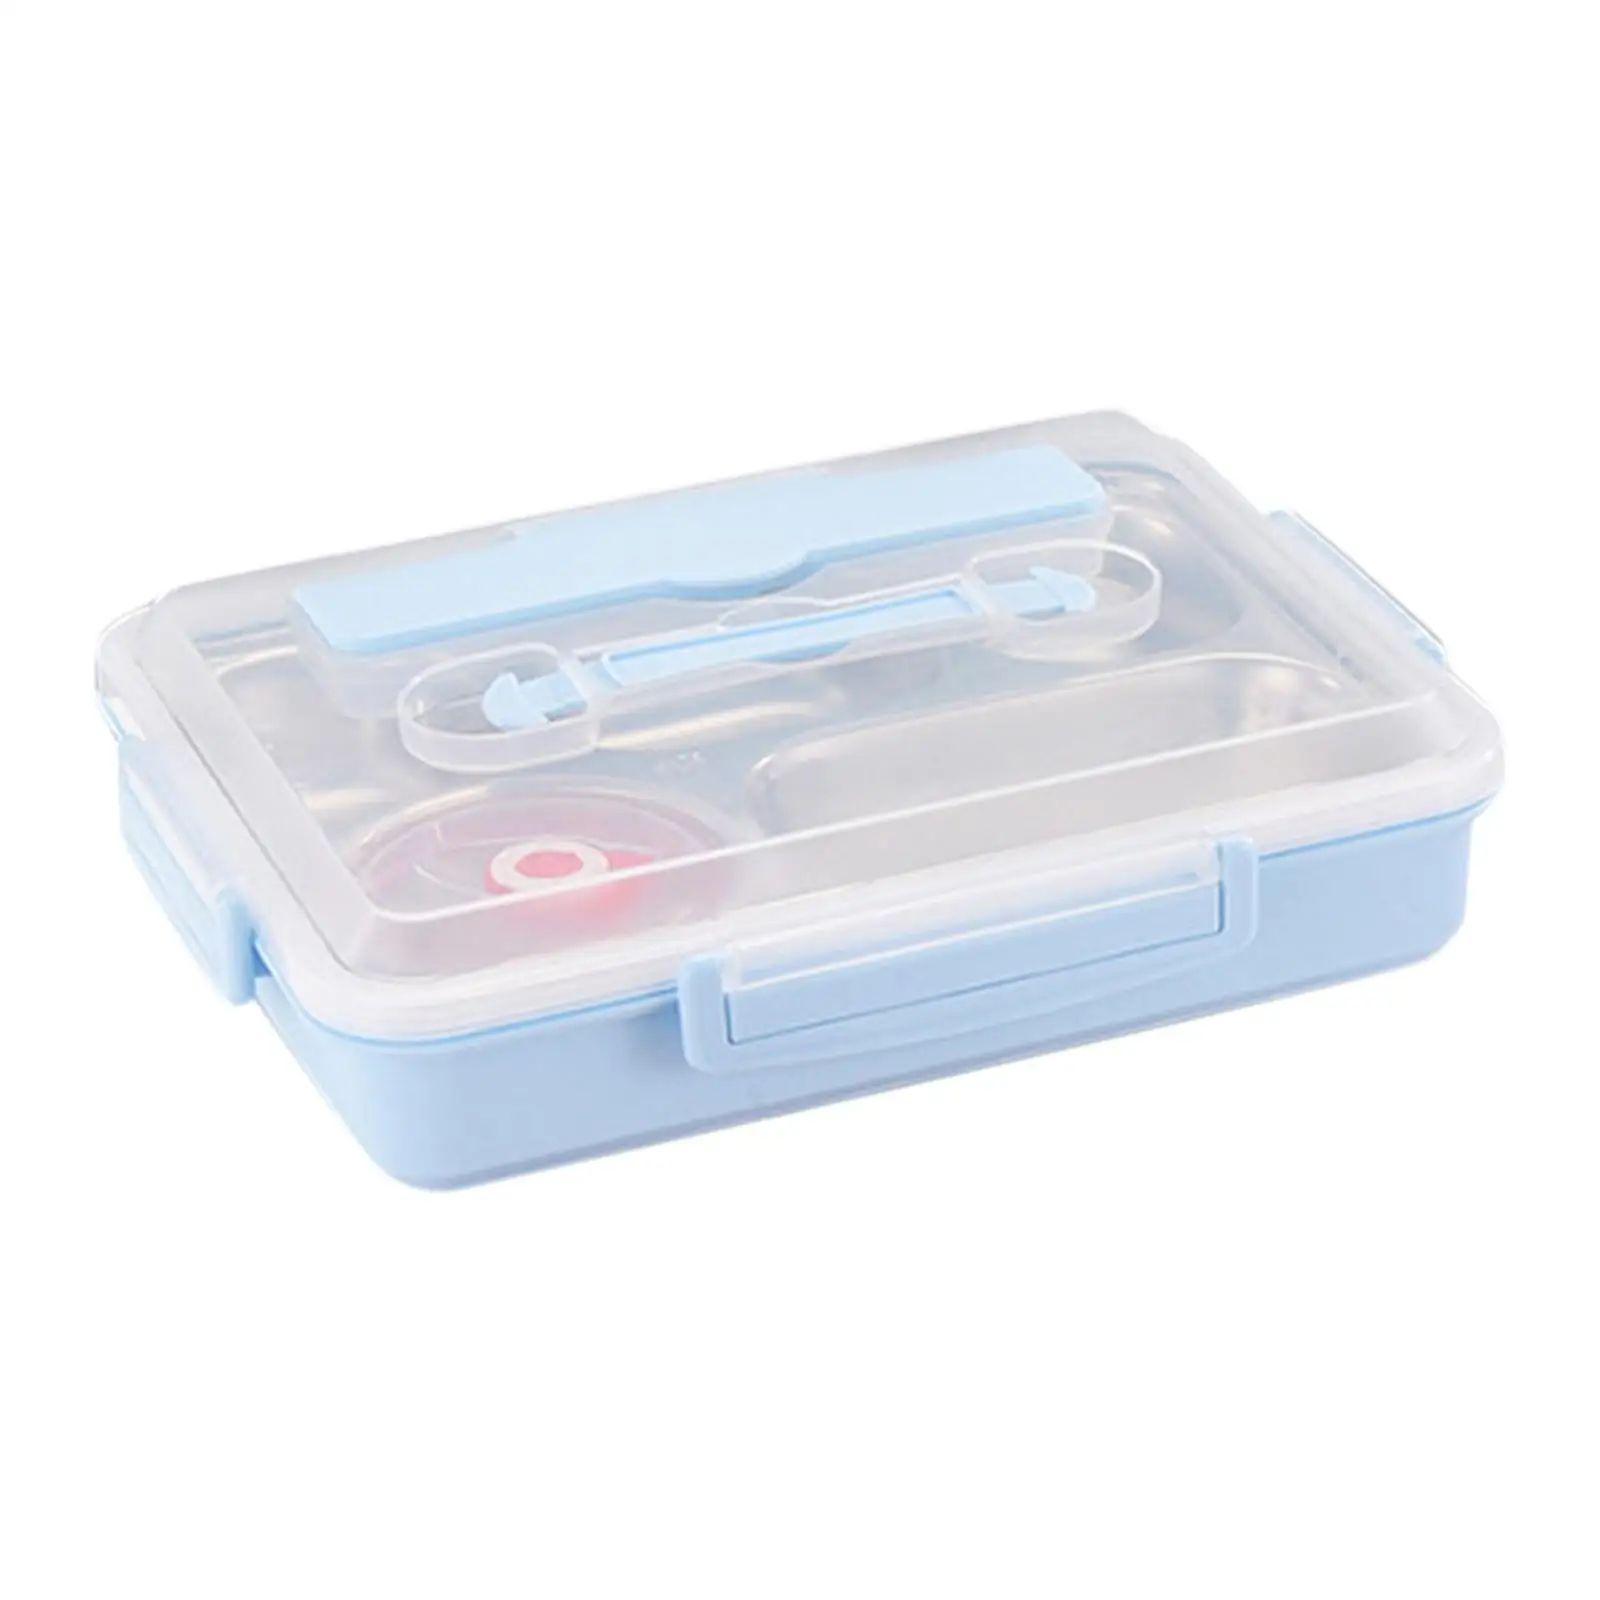 Bento lunch box Portable Hot Water Heating Stainless steel Leakproof for Car Truck Traveling Picnics Home